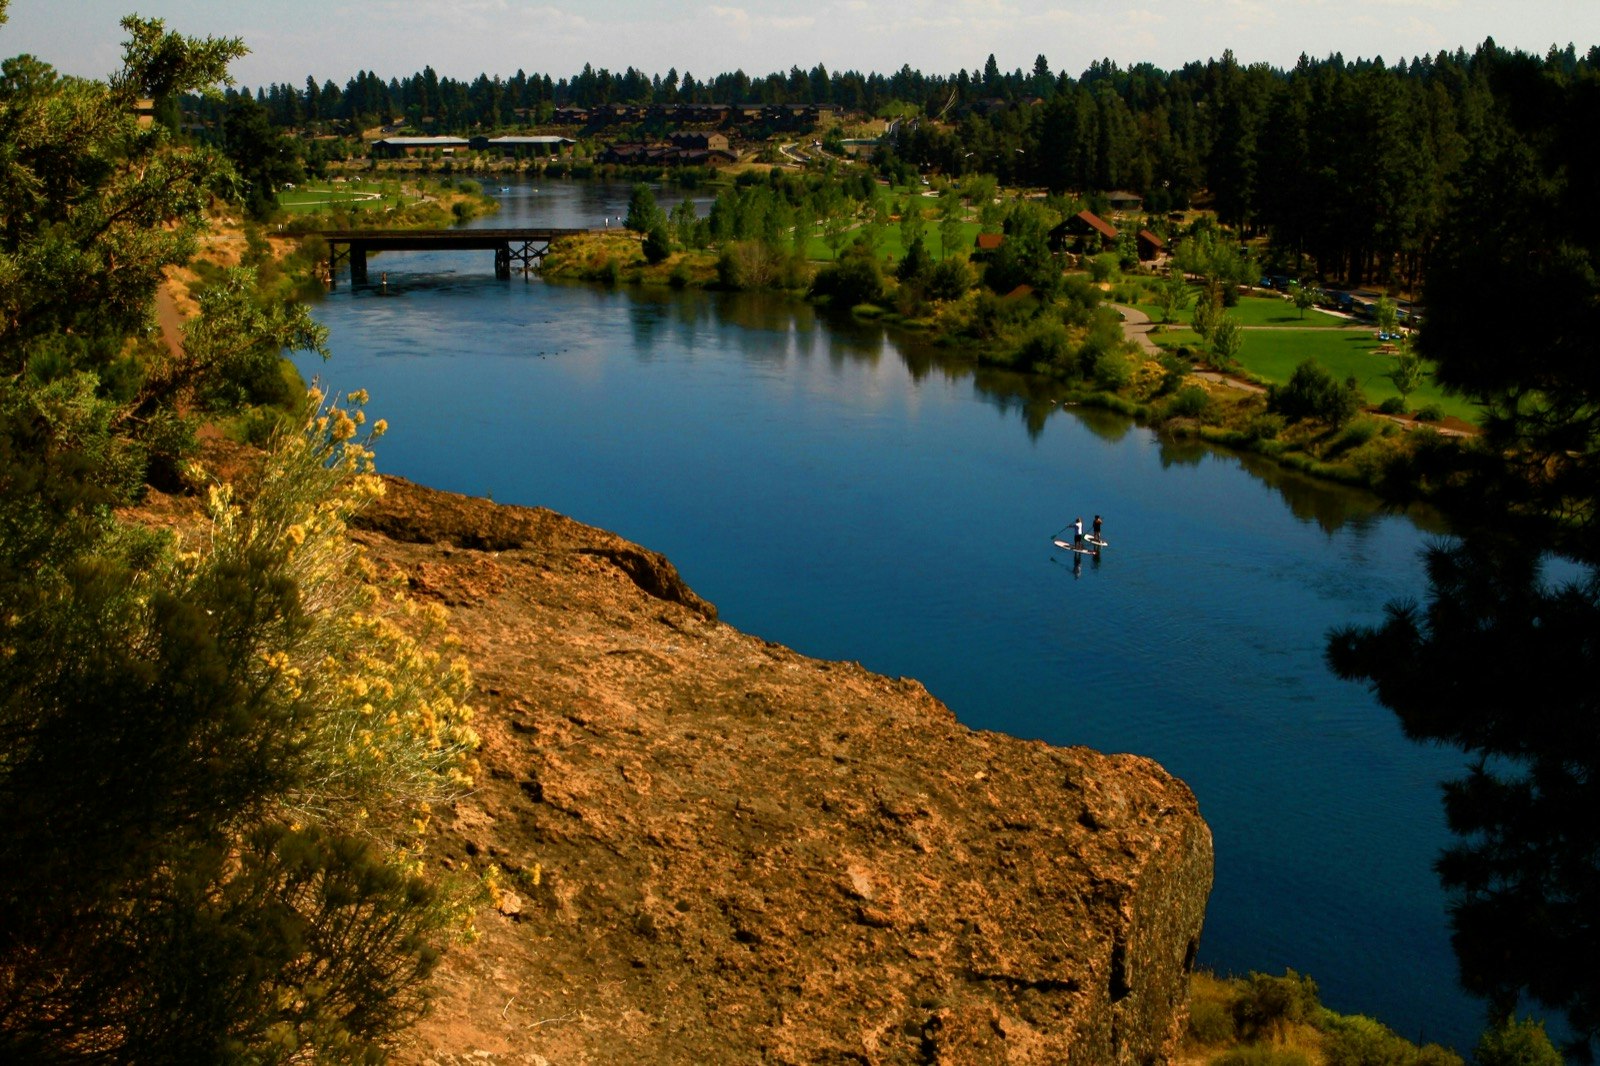 Two people are seen paddleboarding on a deep blue river from a vantage point far above on a rocky outcropping near Bend, Oregon